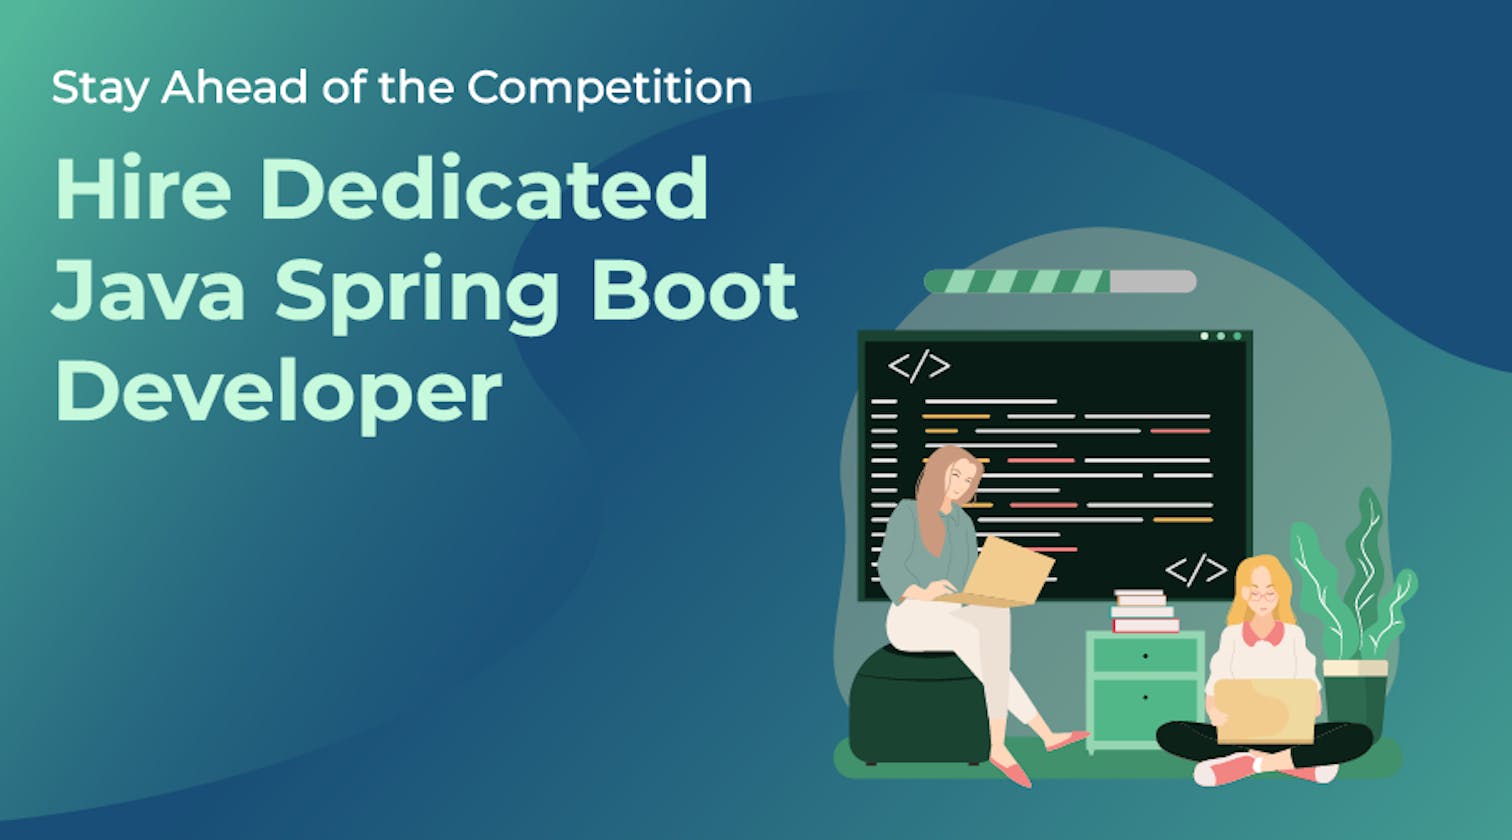 Stay Ahead of the Competition: Hire Dedicated Java Spring Boot Developer